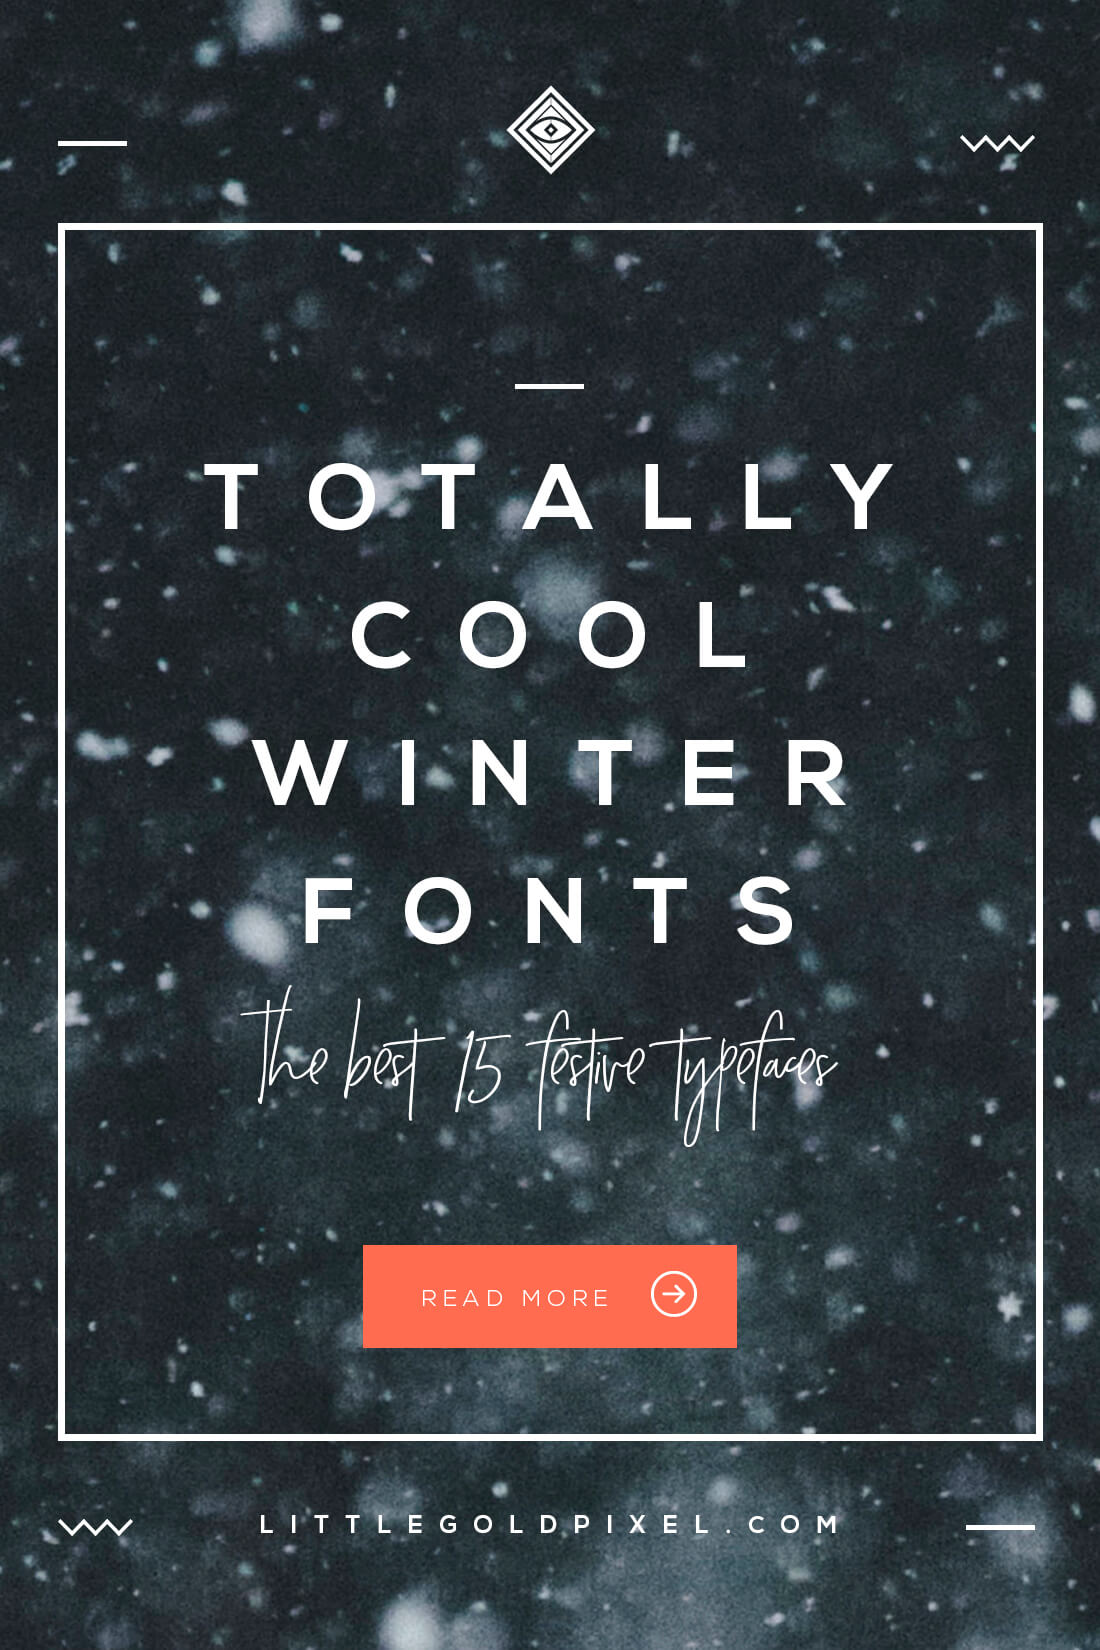 Winter Fonts • 15 Coolest Typefaces for Your Festivities • Little Gold Pixel • In which I round up 15 cool winter fonts to liven up your personal designs. Festive typefaces will help you celebrate the most wonderful time of the year. #winterfonts #typography #fontroundup #holidayfonts #holidaycardfonts